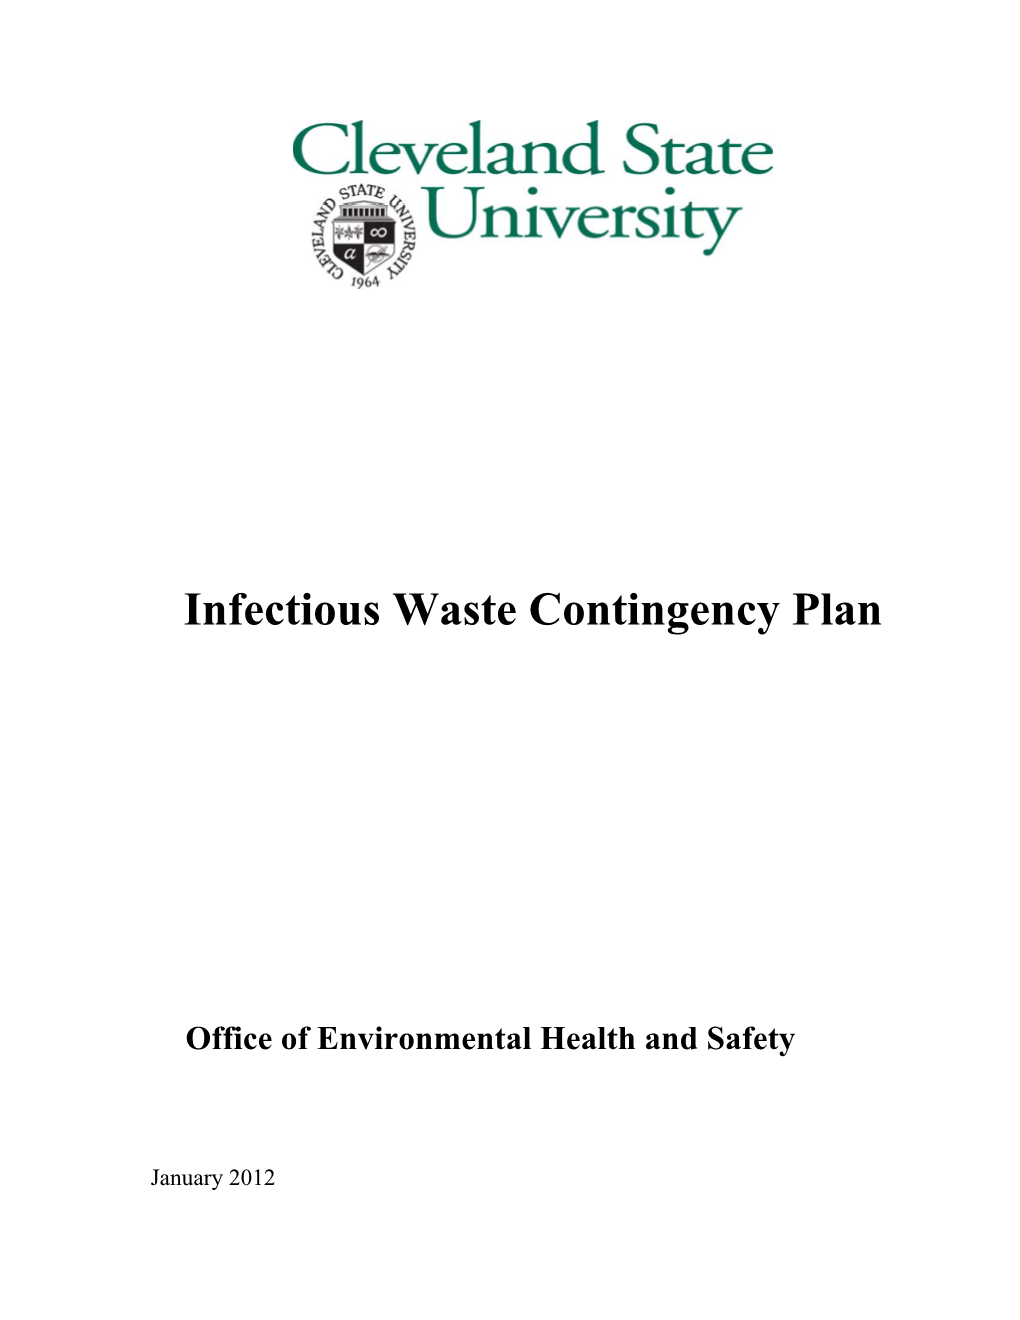 Infectious Waste Contingency Plan